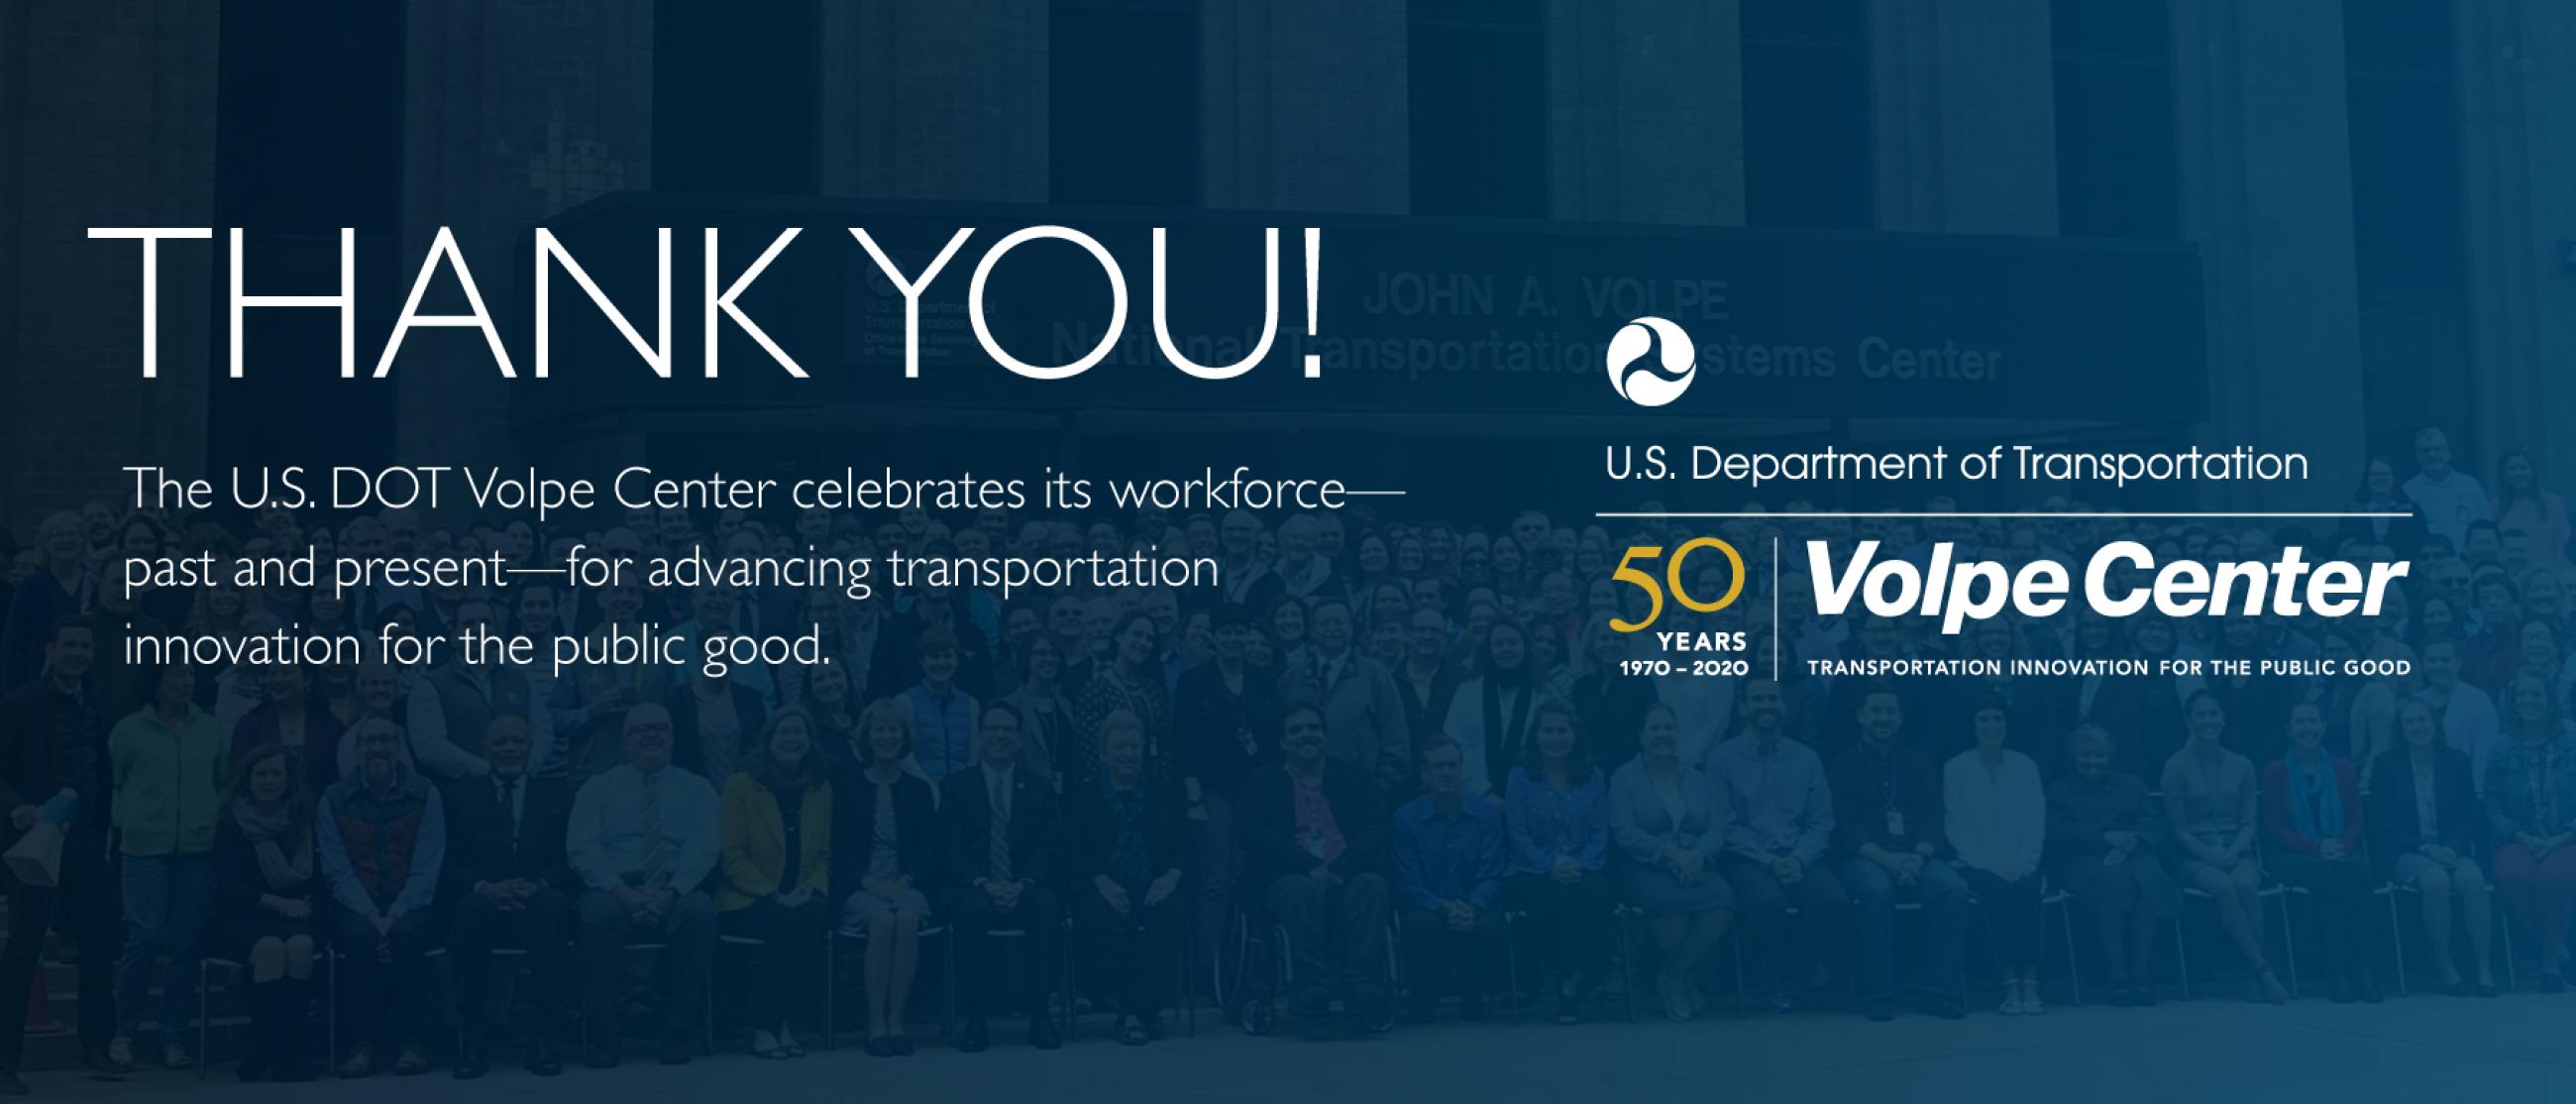 Thank you sign to the Volpe Center workforce for 50 years of transportation innovation.